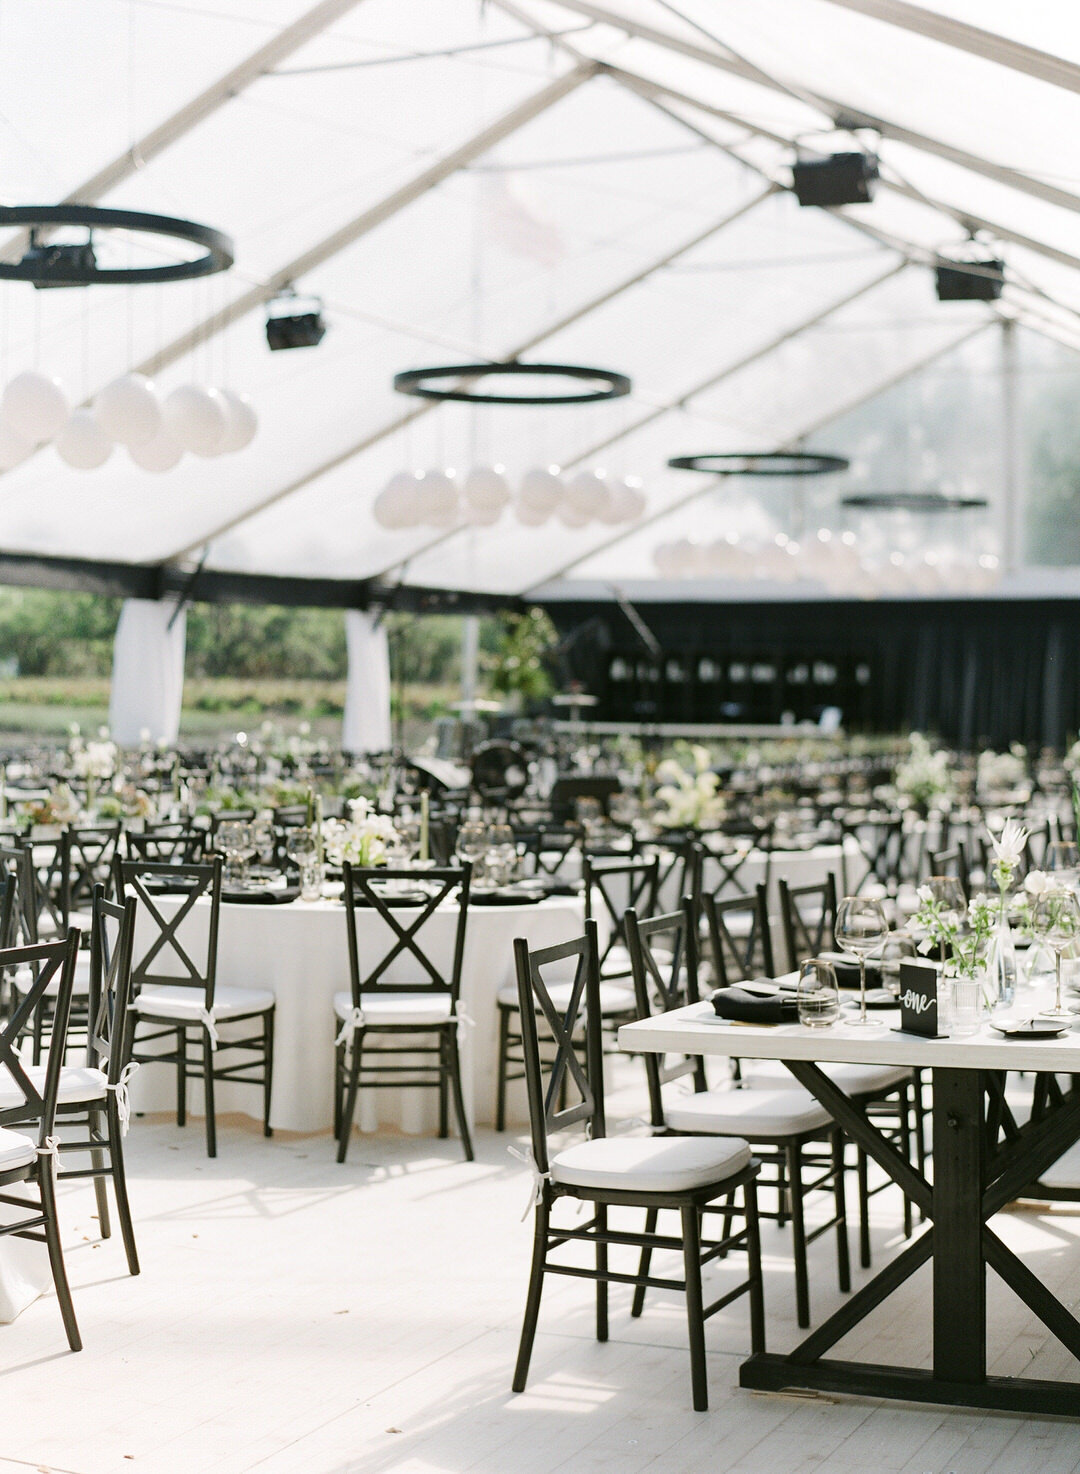 Wedding Reception Tent with tables and chairs